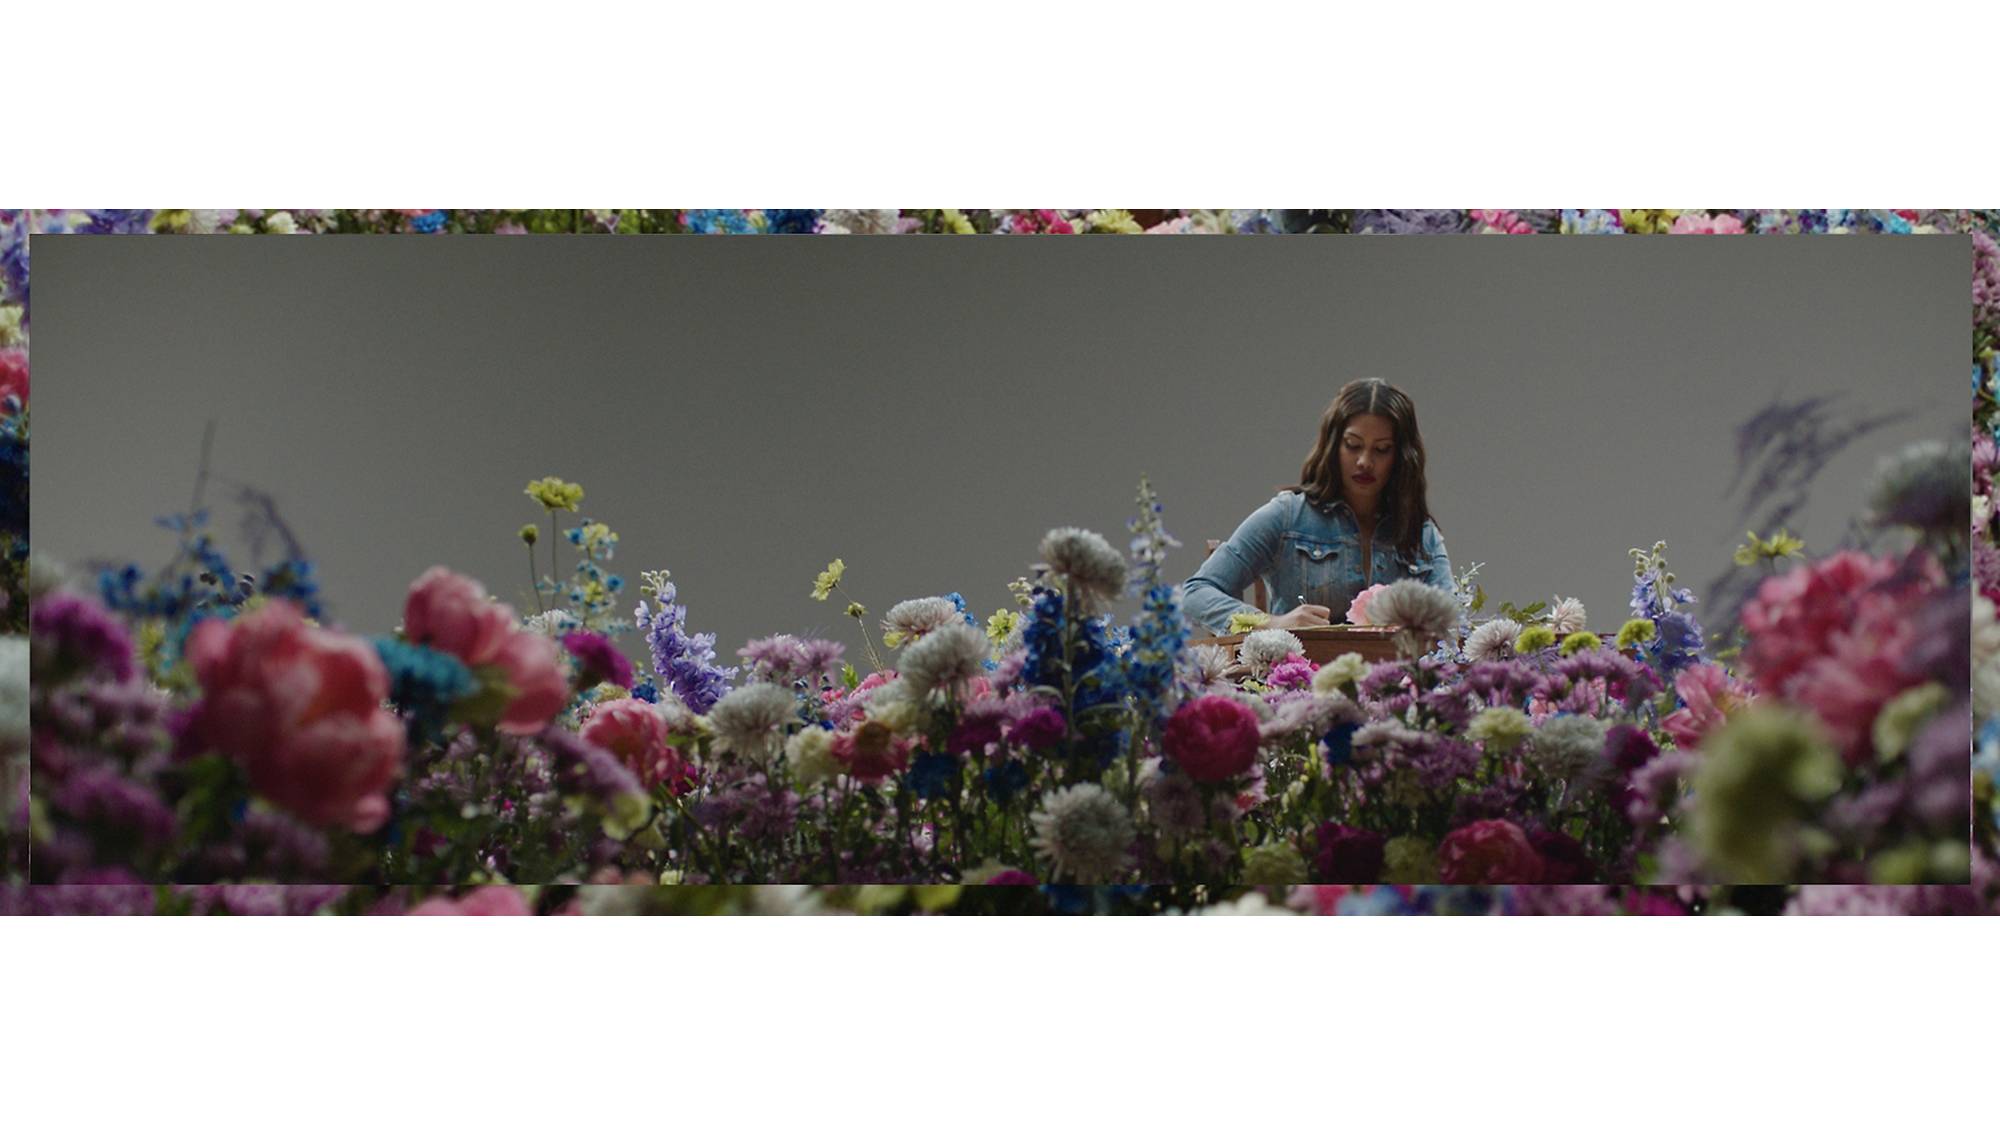 Image of Leyna Bloom sitting at a wooden desk, wearing a denim western shirt, writing on a stack of papers while surrounded by colorful flowers.